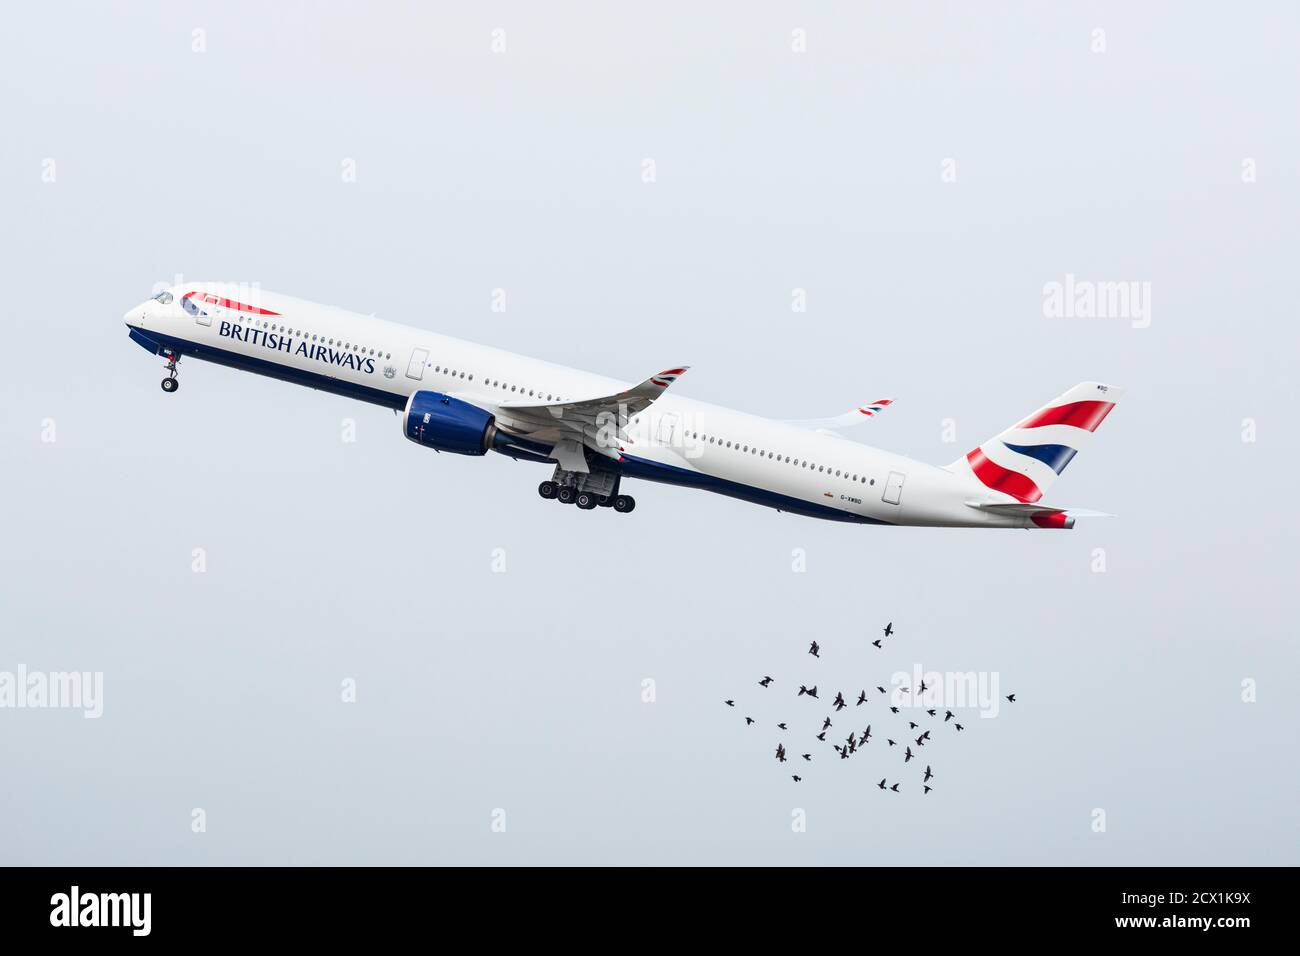 British Airways Airbus A350 taking off with a flock of birds in the foreground on September 26th 2020 at London Heathrow Airport, Middlesex, UK Stock Photo